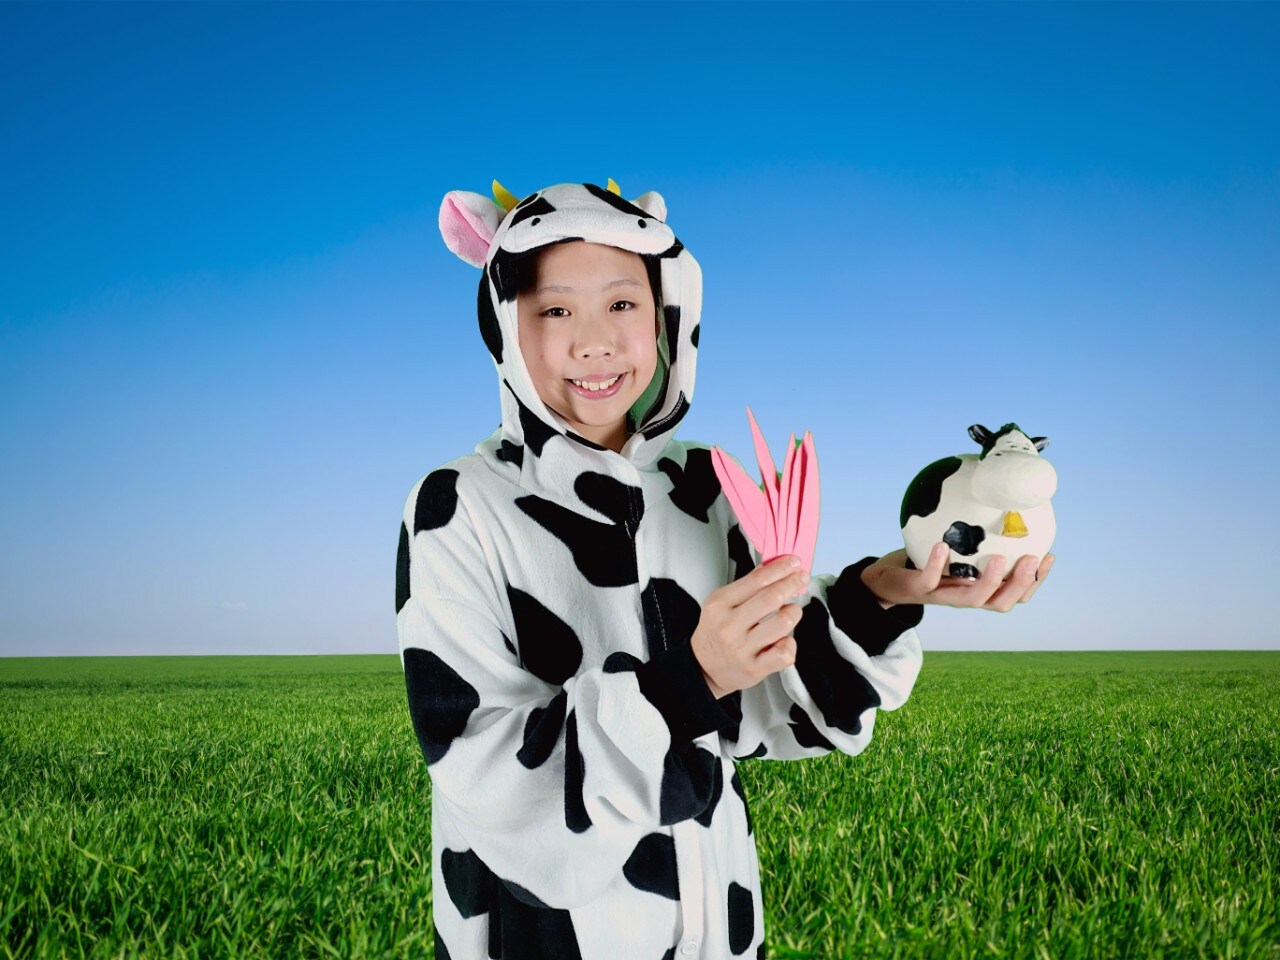 Charlotte dressed as a cow